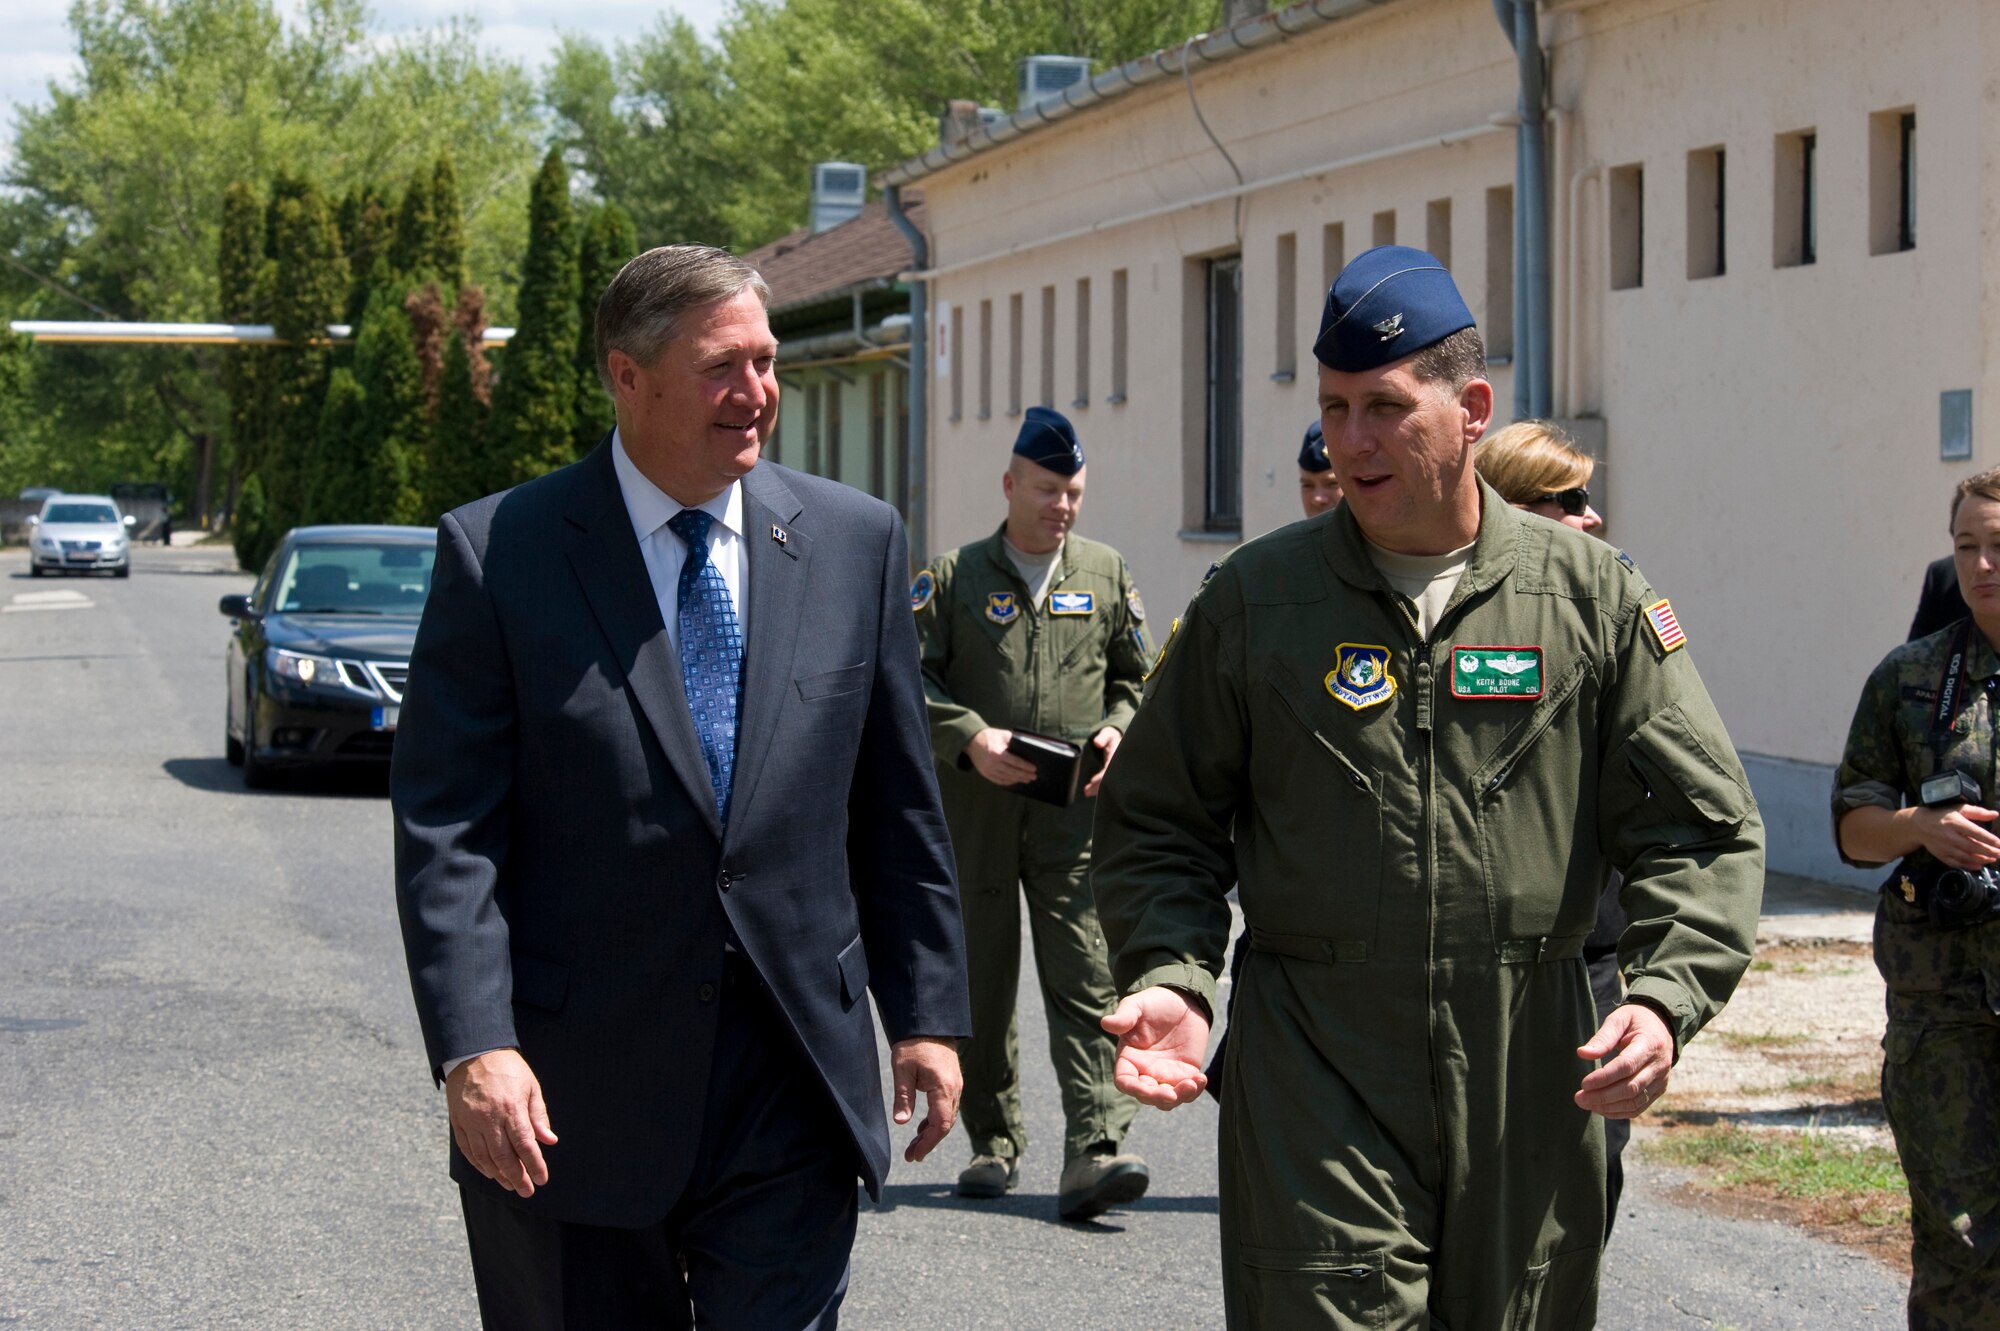 Col. Keith Boone, commander of the Heavy Airlift Wing, talks with Secretary of the Air Force Michael Donley during a tour of Pápa Air Base, Hungary, July 11, 2012. The secretary visited the HAW to speak with Airmen about the direction of the Air Force, meet with them on the job and learn what's on their minds. (U.S. Air Force photo/Master Sgt. Wayne Clark)